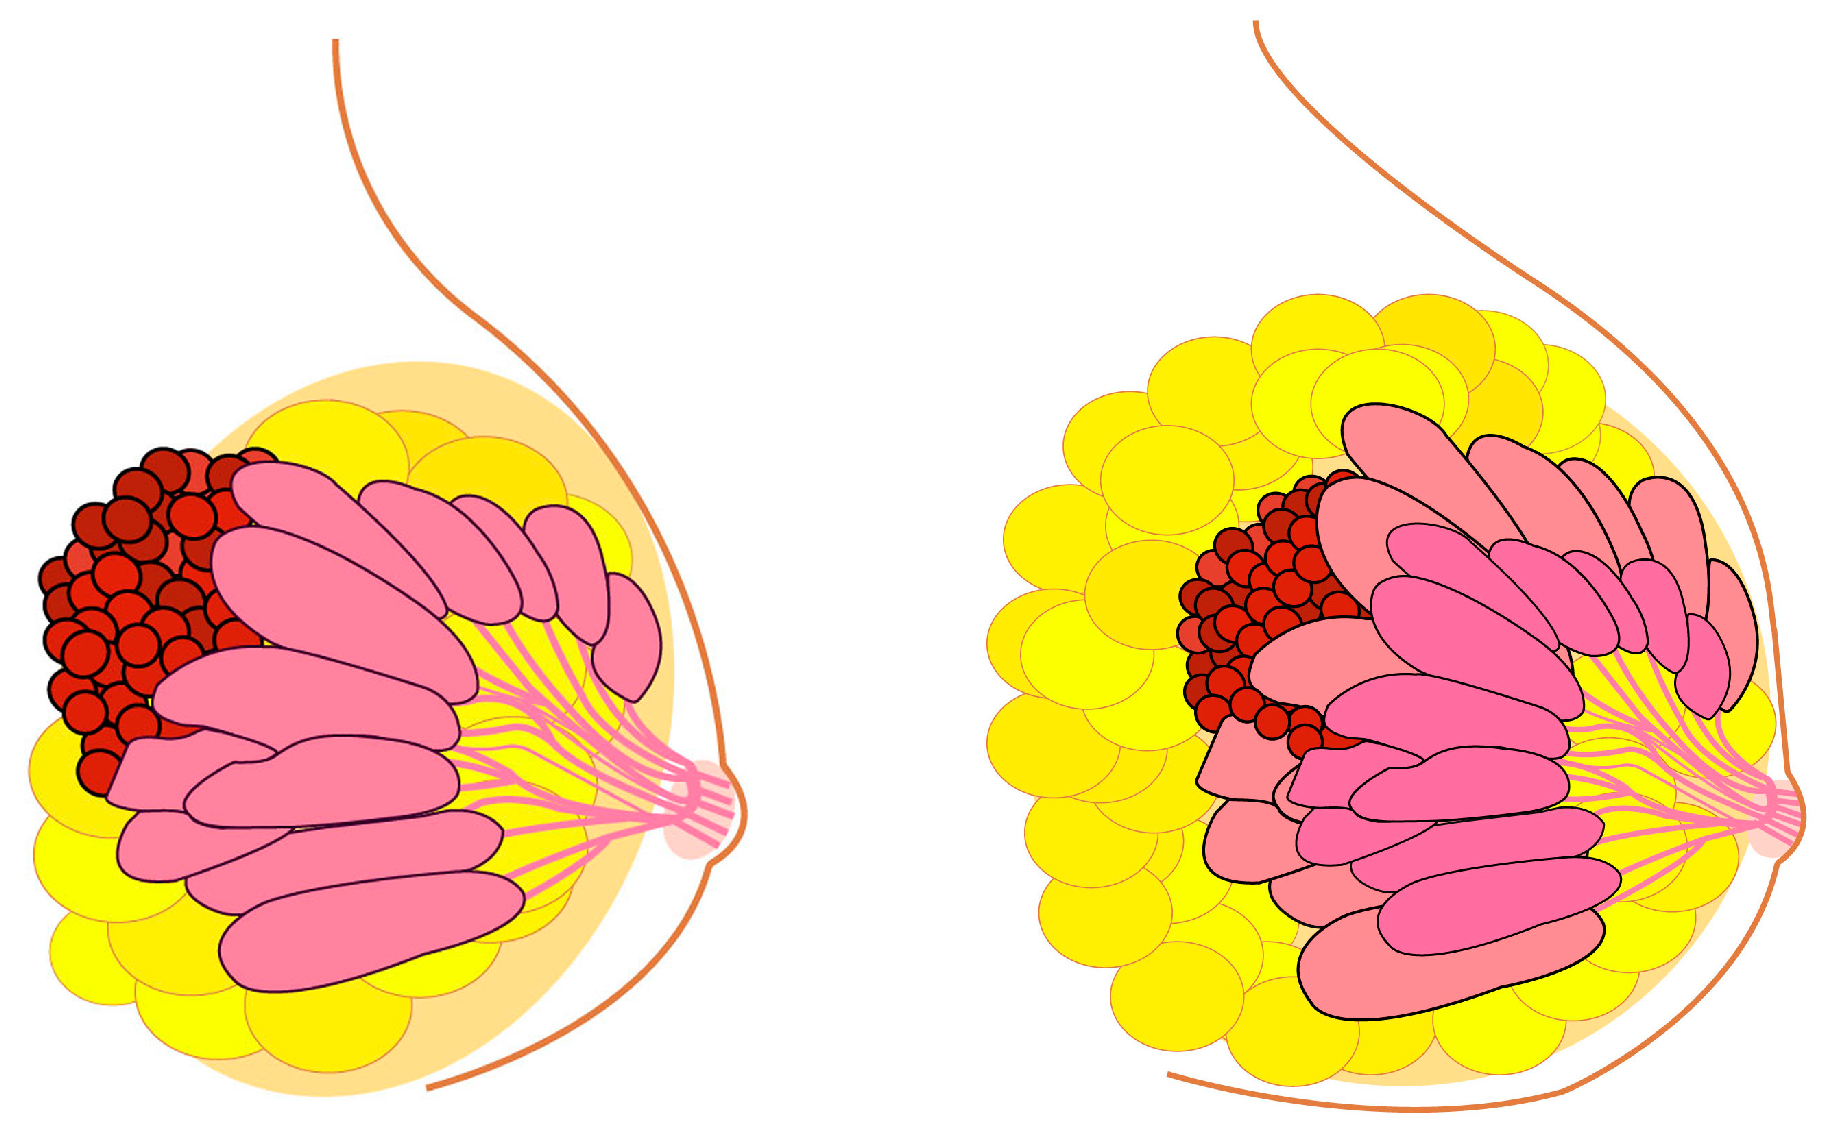 The Search for the Ideal Female Breast: A Nationally